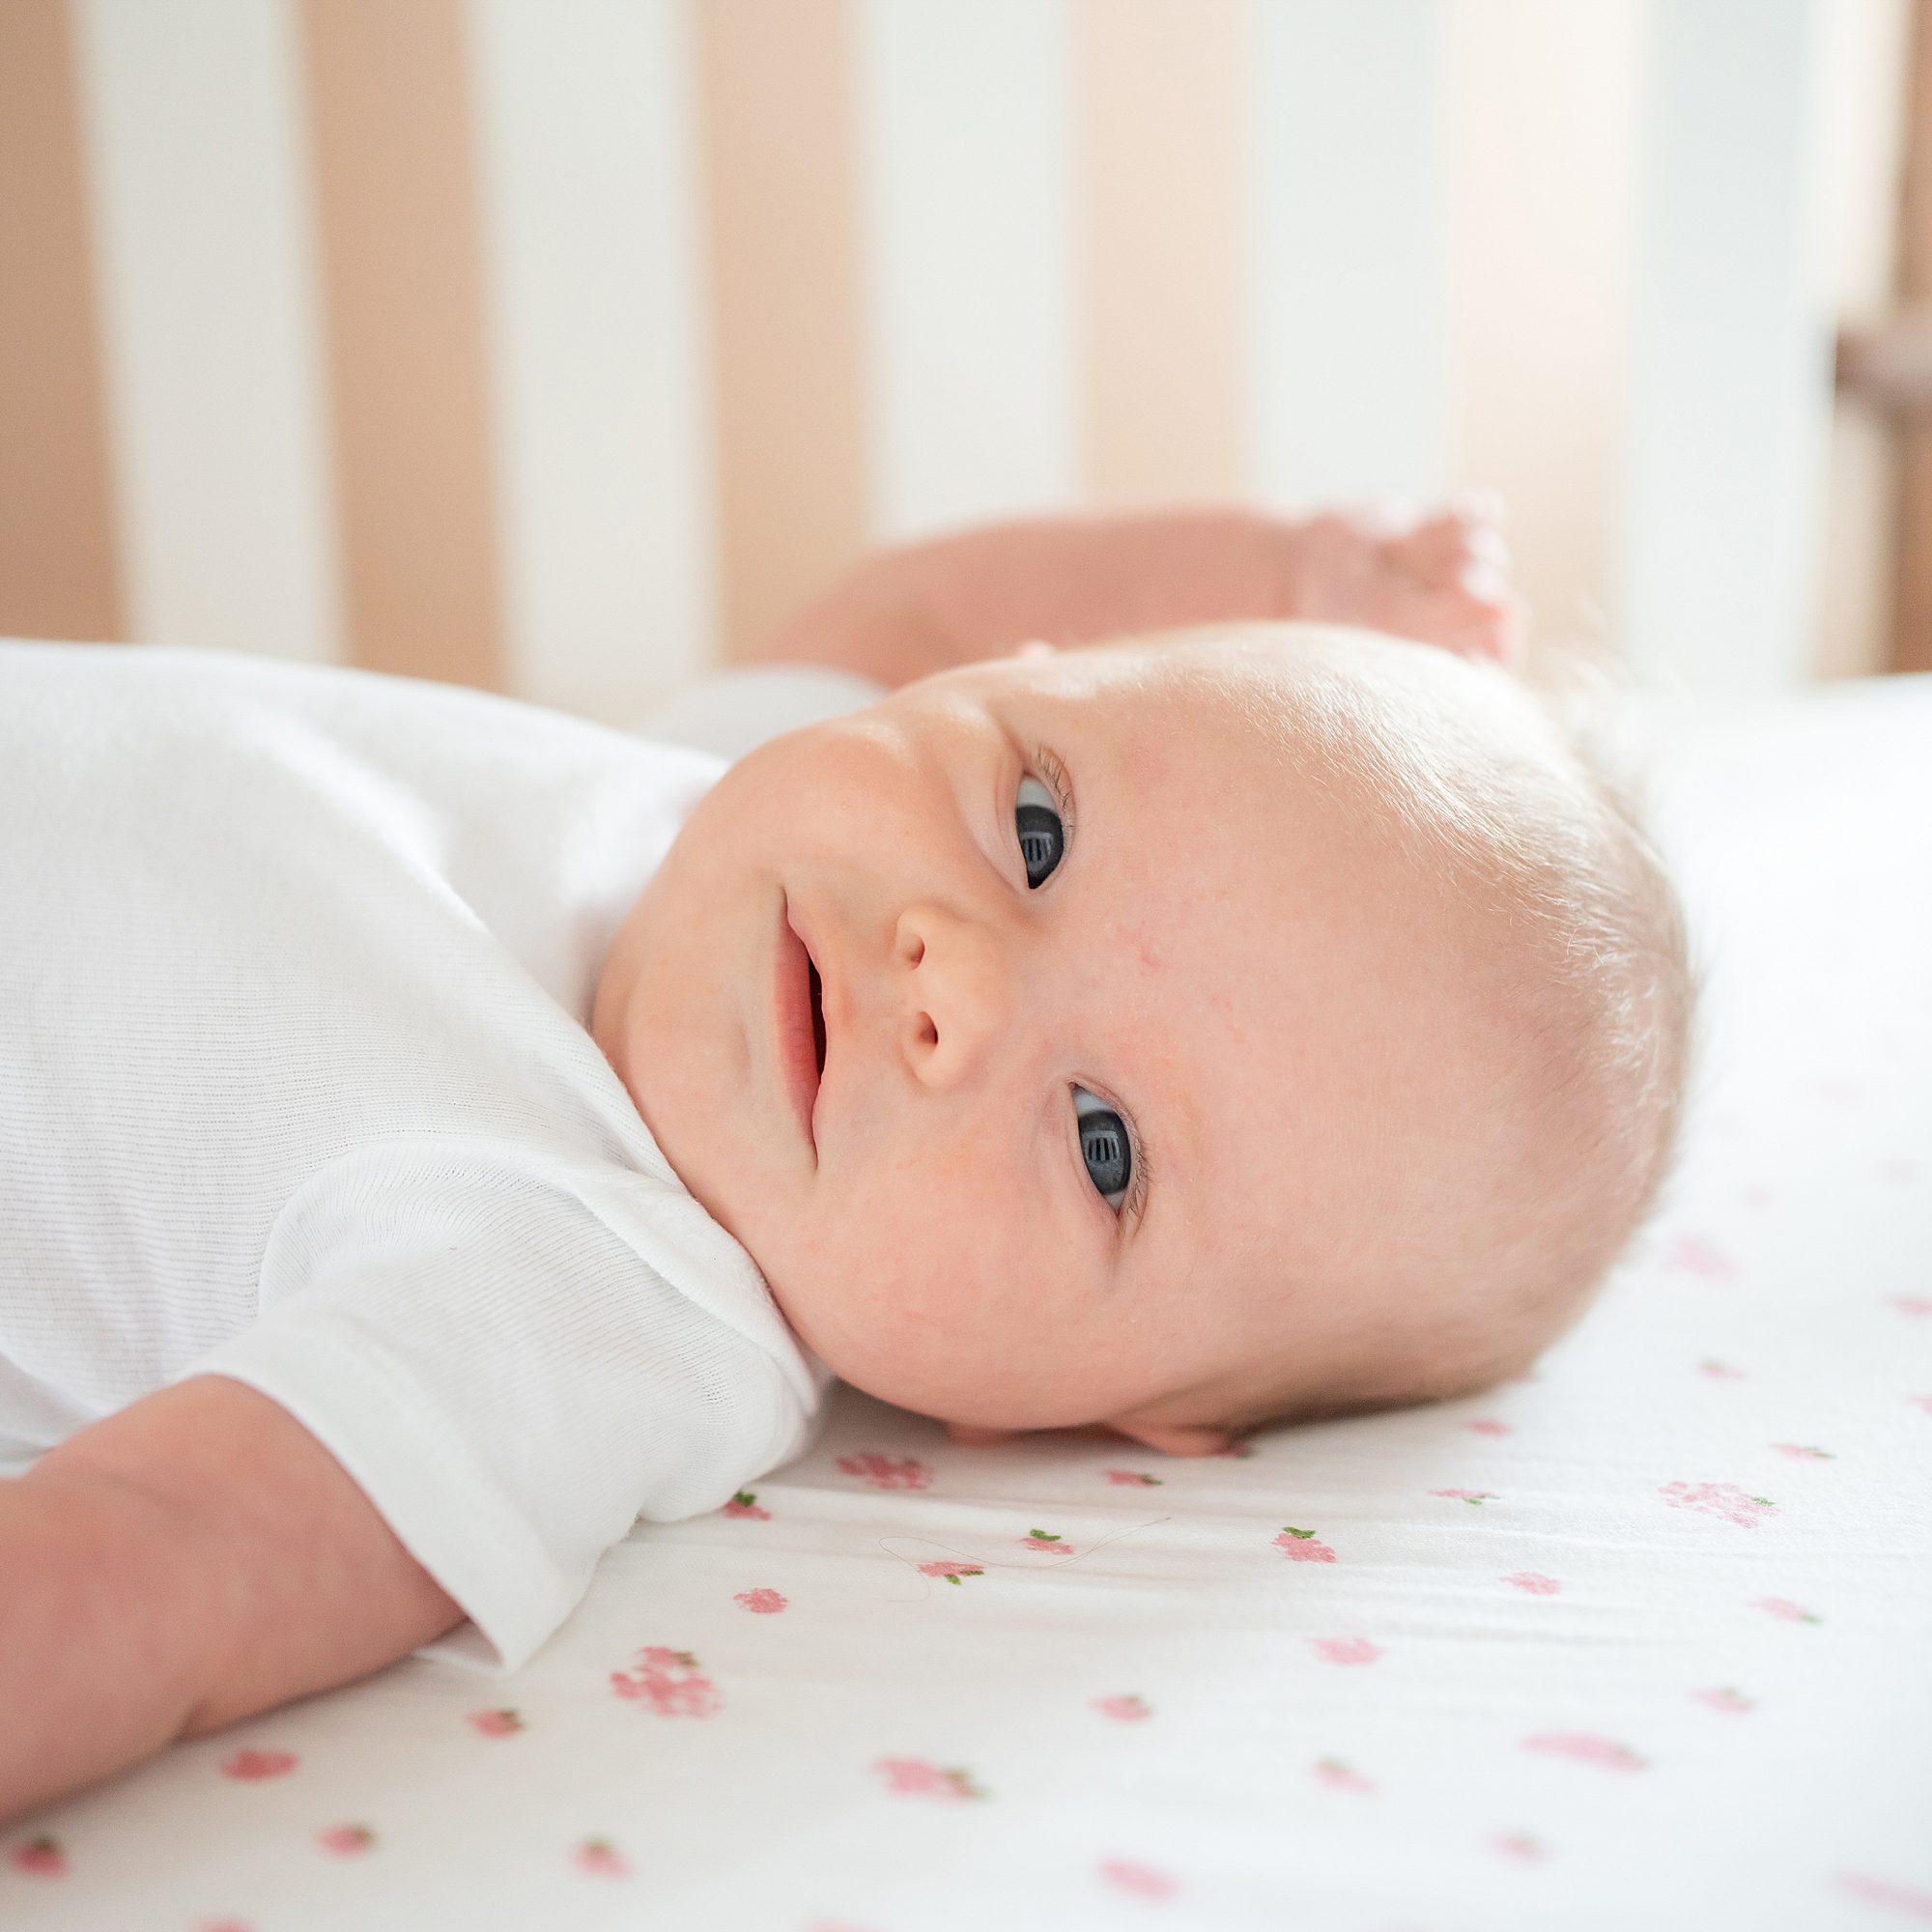 A baby is laying in a crib with his eyes wide open.